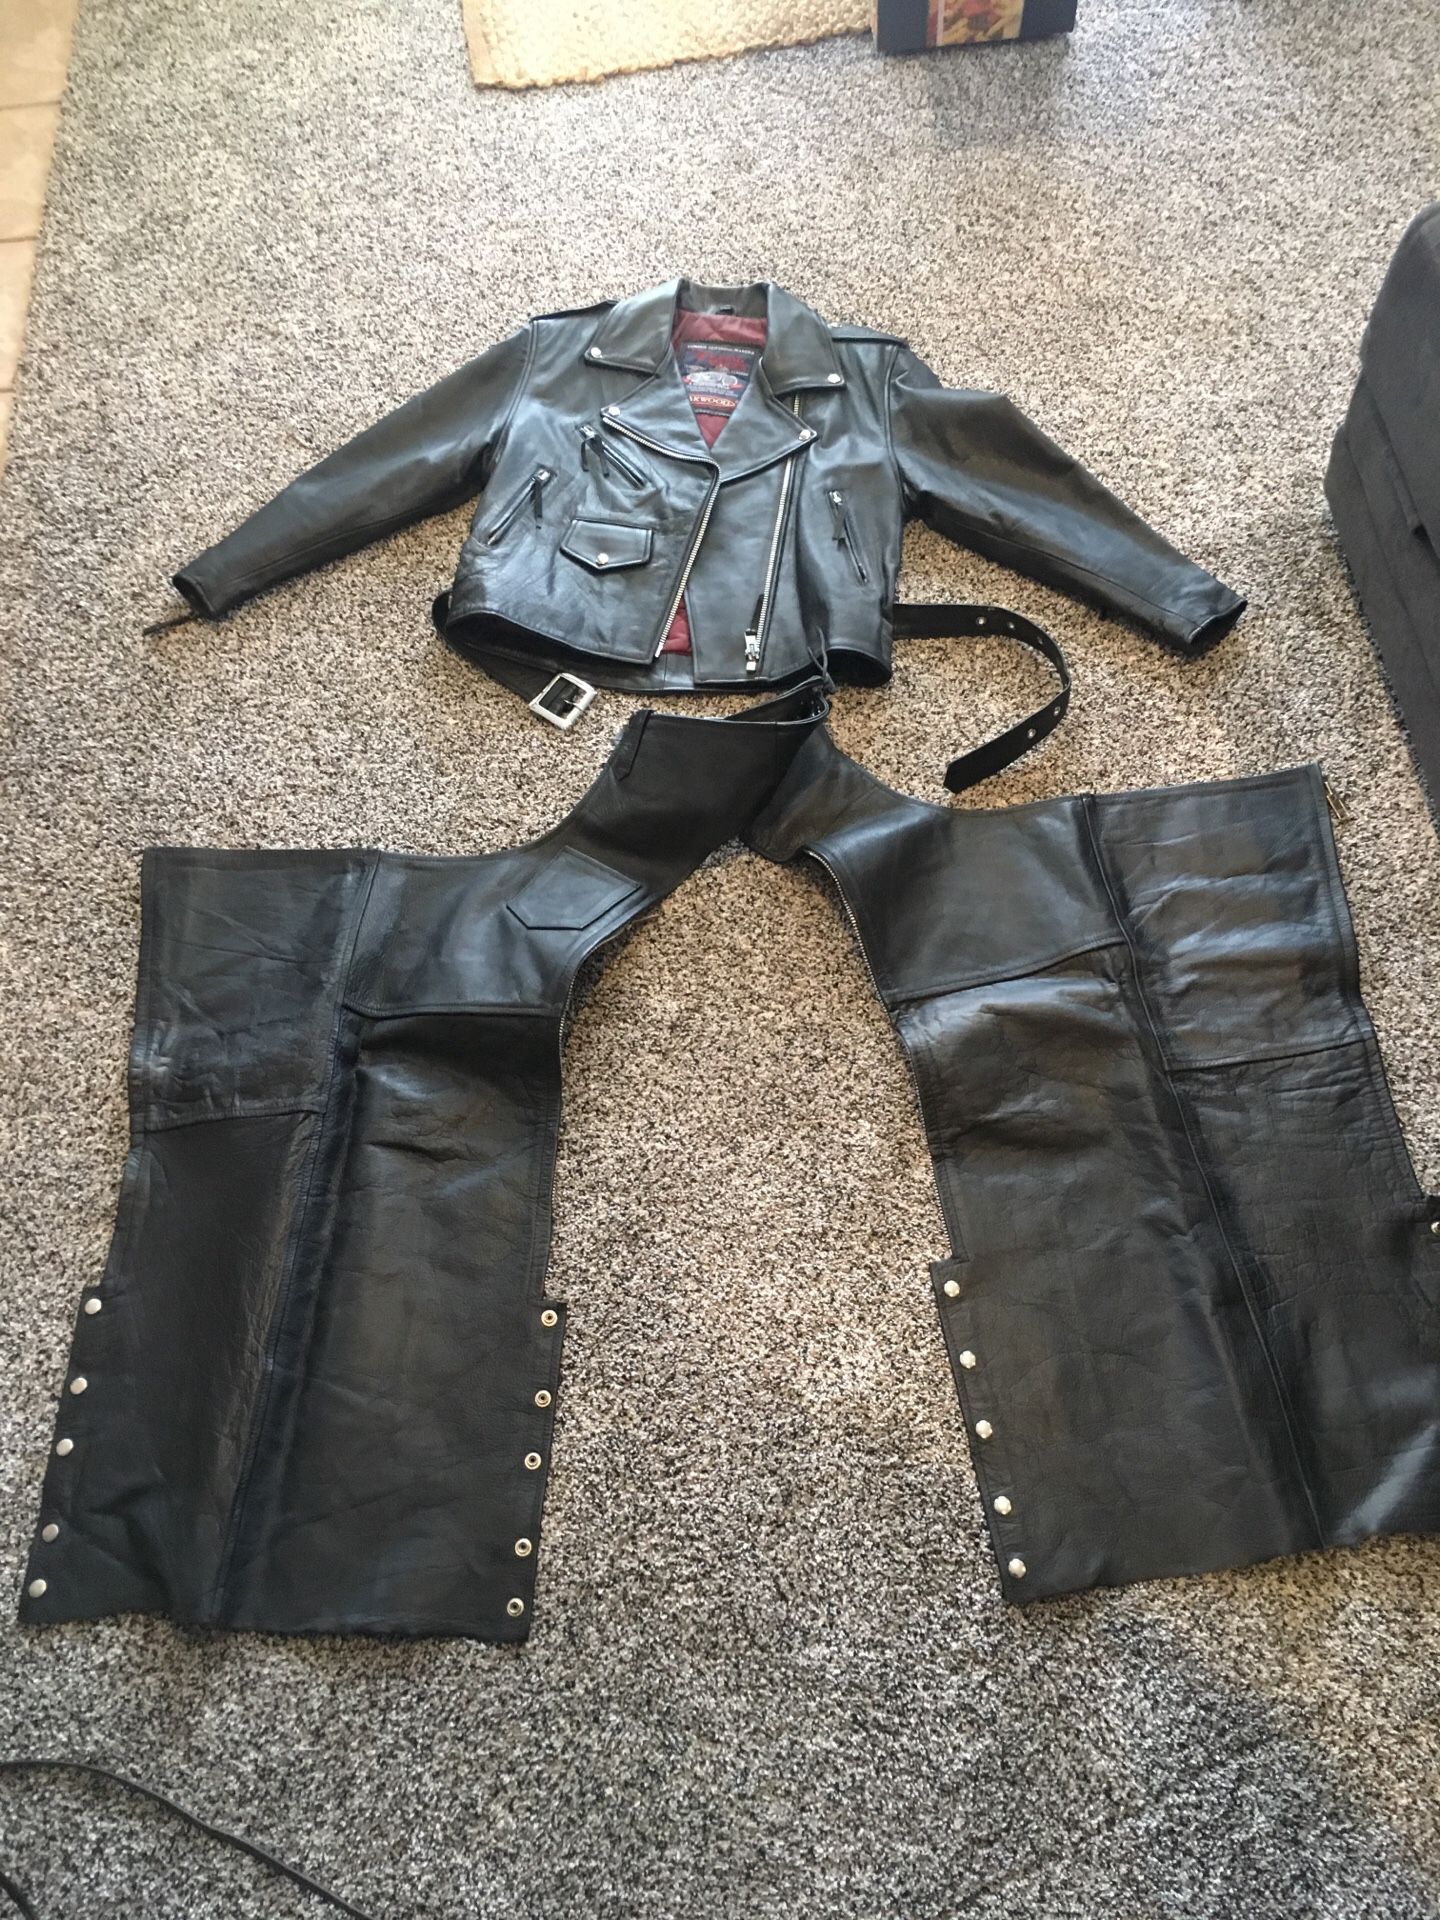 Women’s %100 Leather Motorcycle Jacket and Chaps